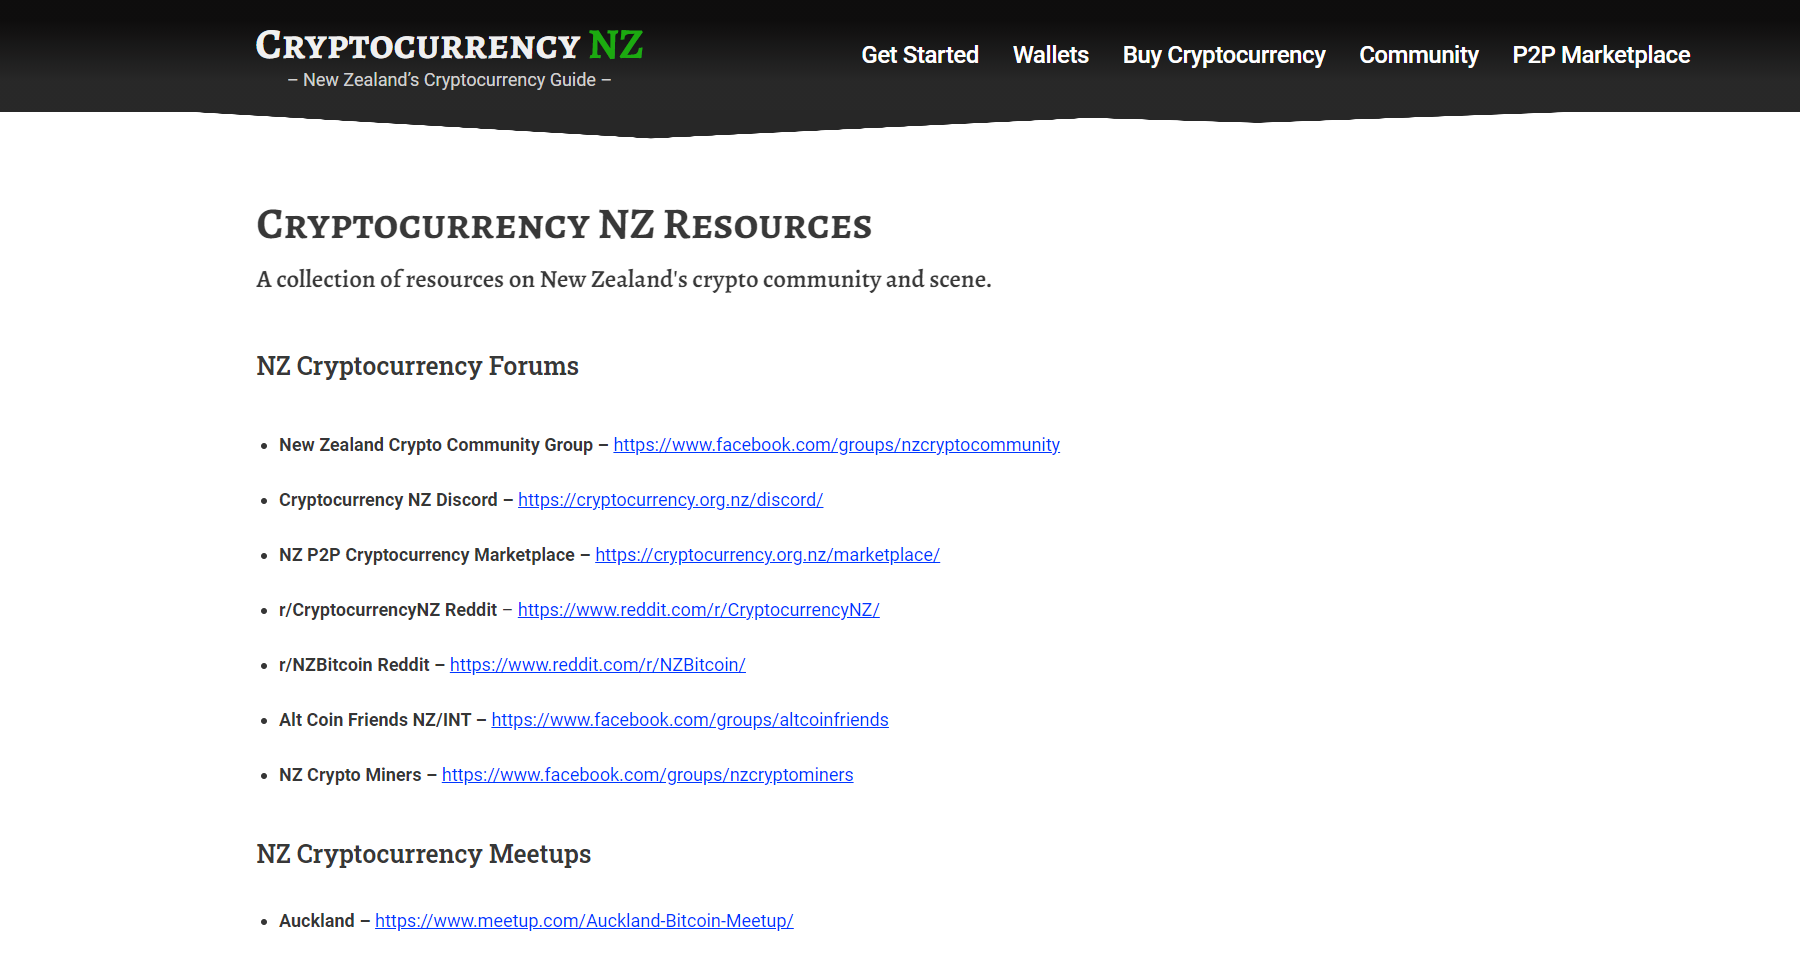 Resources - Cryptocurrency NZ